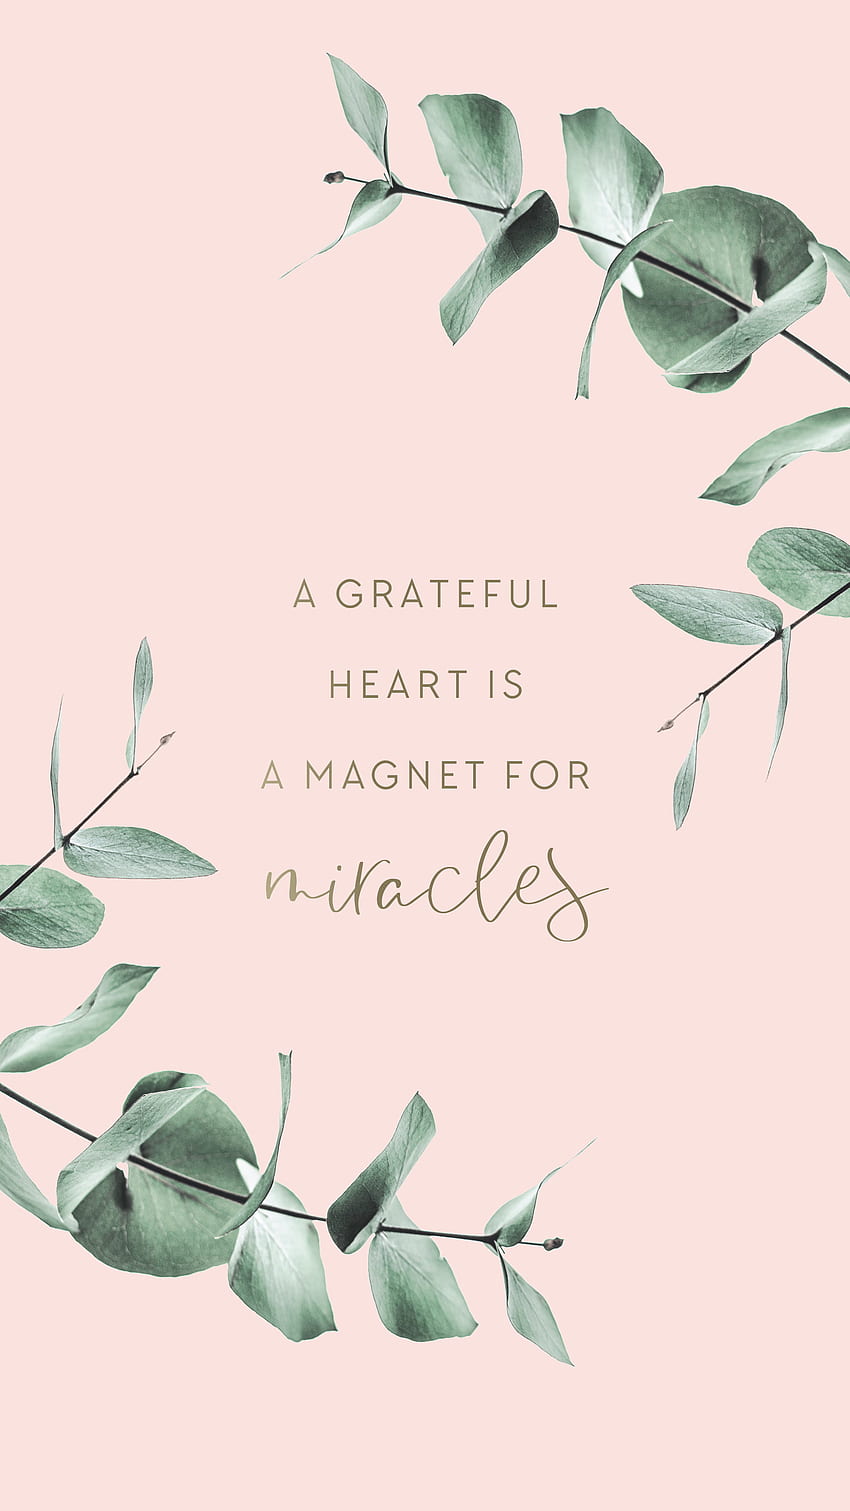 A grateful heart is a magnet for miracles HD phone wallpaper